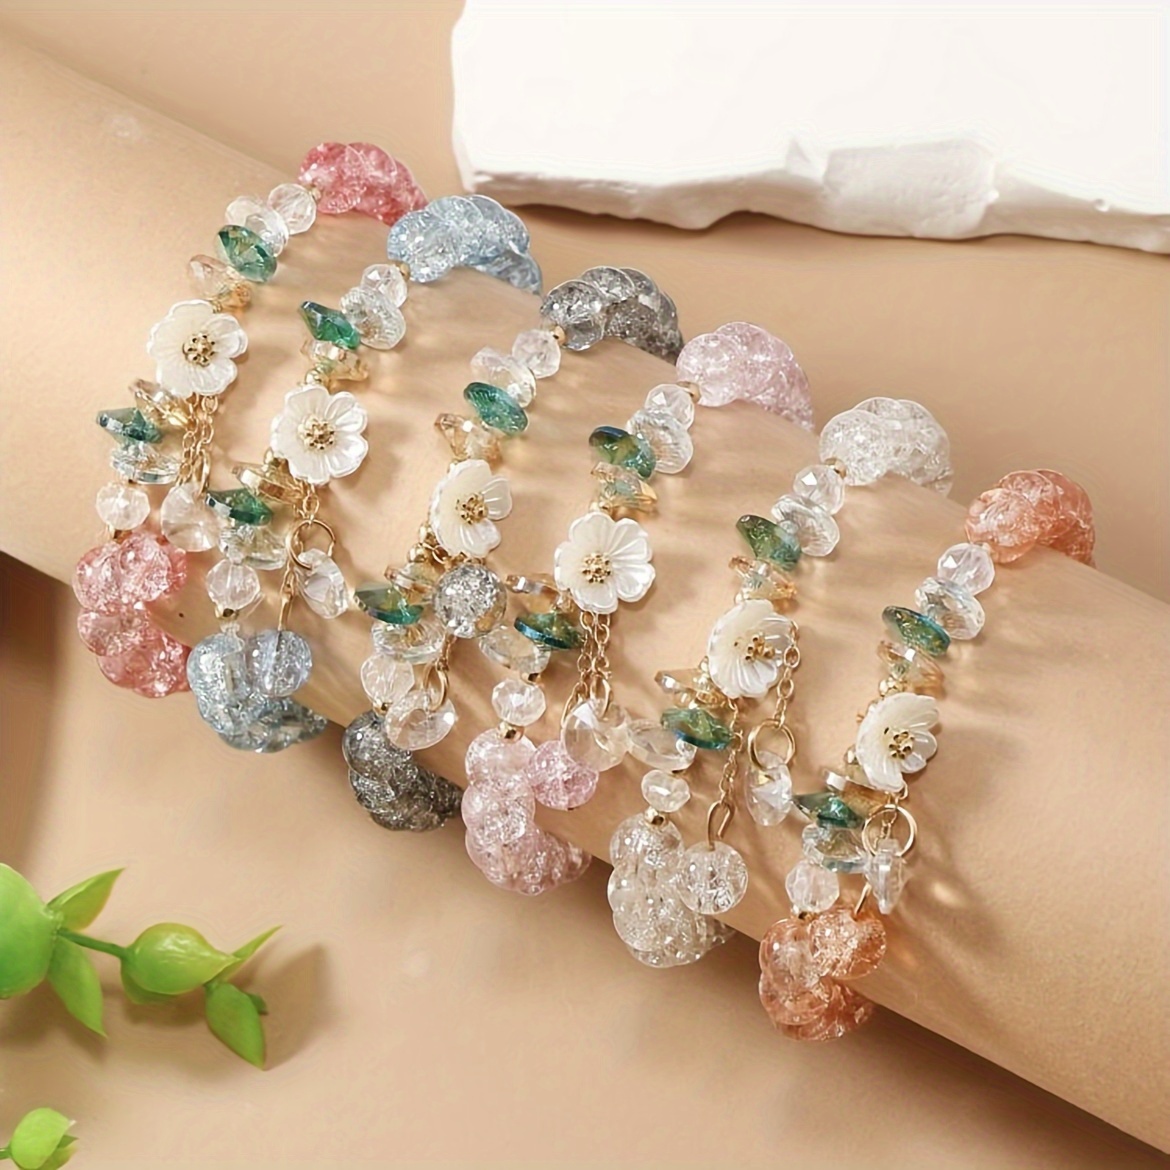 

6-piece Set Boho Cute Floral Crystal Beaded Bracelets For Women - Fashion Camellia Daisy Charm Stretch Bracelets For Daily Wear & Gift Giving (no Plating, Artificial Crystal)